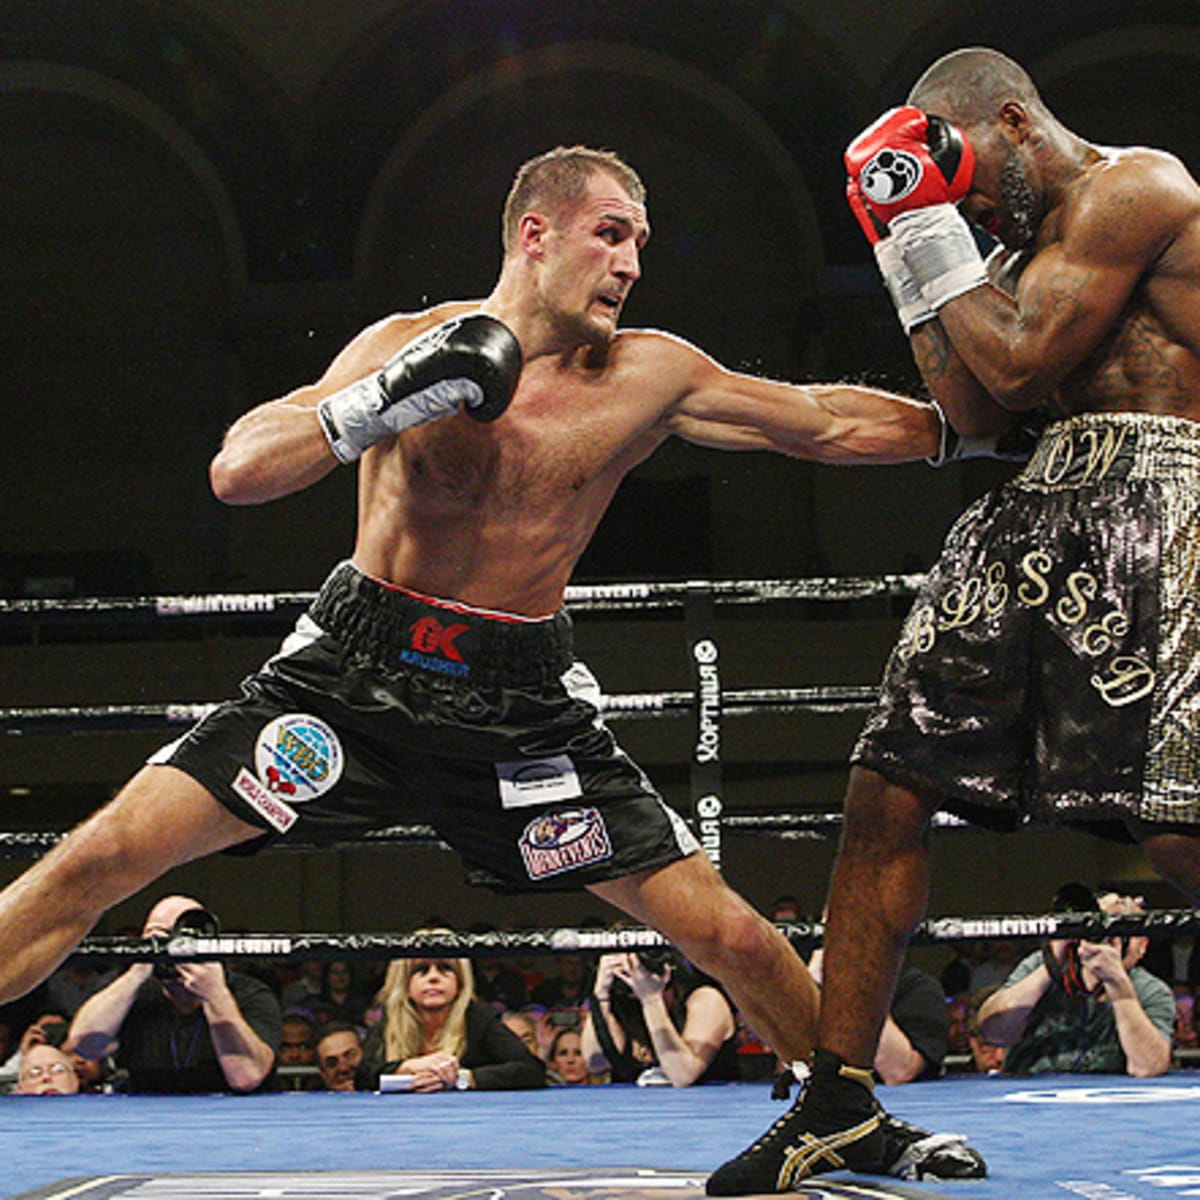 Kovalev says Koivu was not easy to deal with initially with